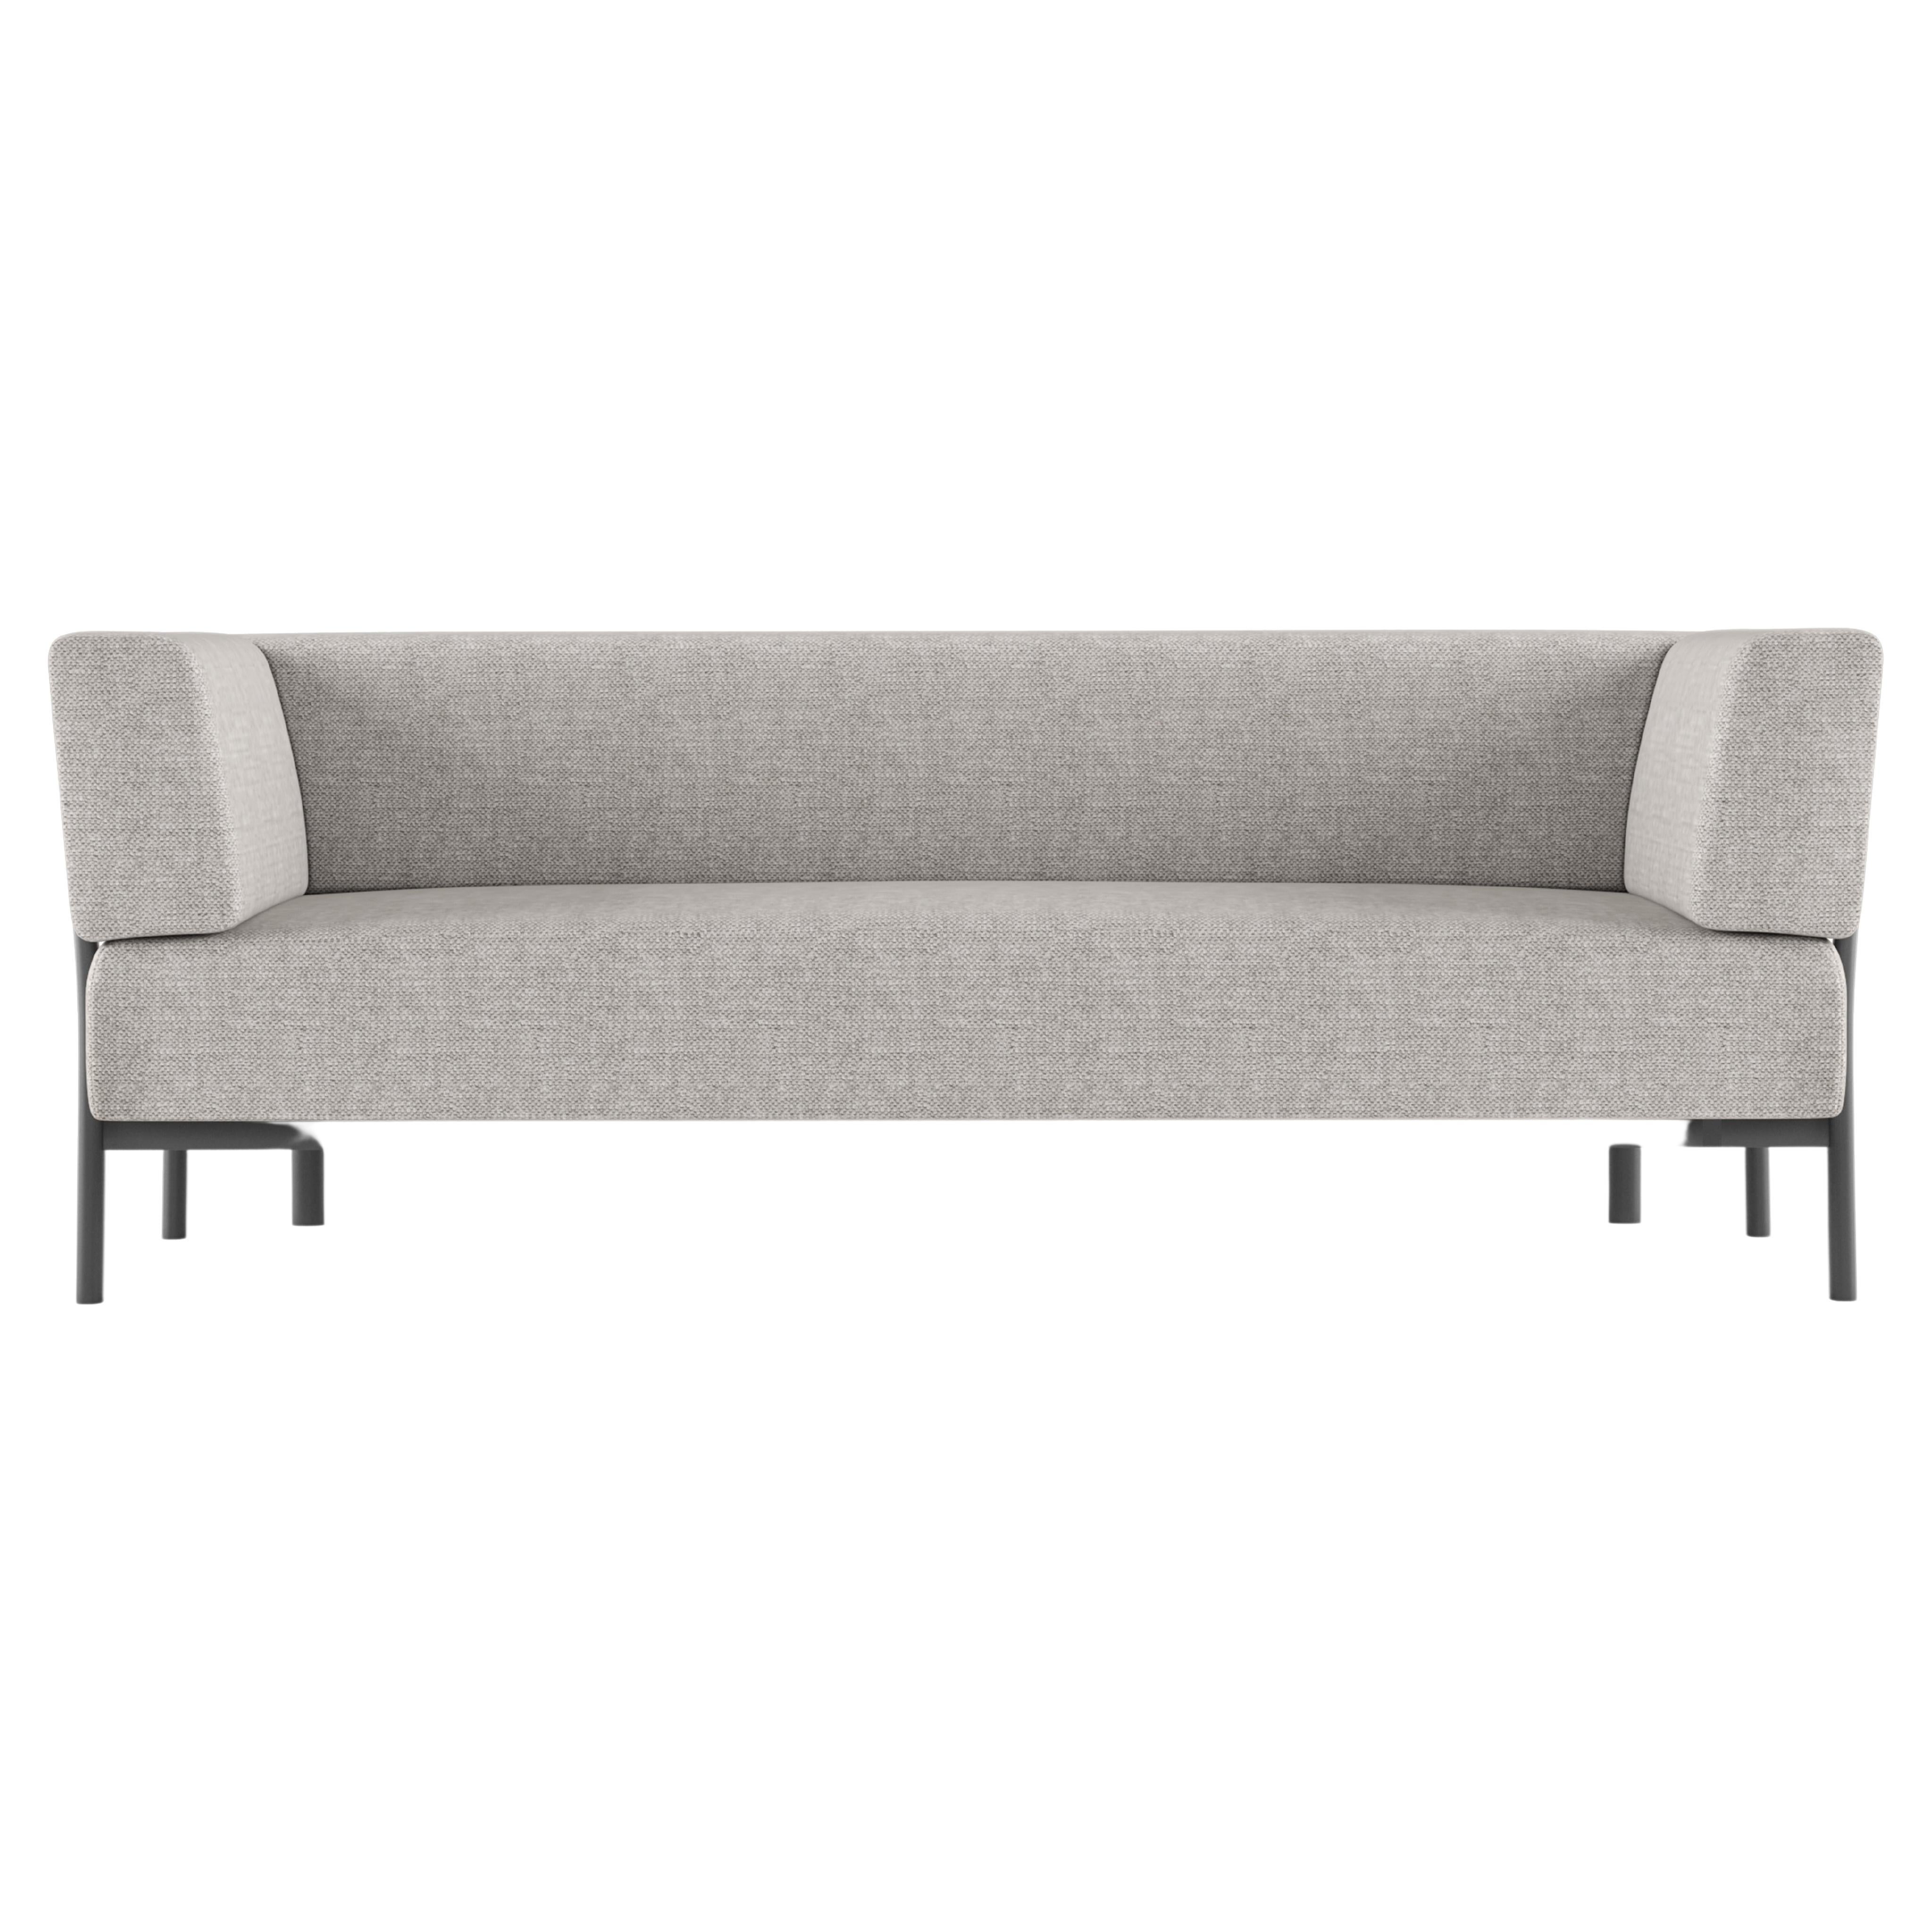 Alias T02_O Ten 2 Seater Outdoor Sofa in Grey and Black Lacquered Aluminum Frame For Sale